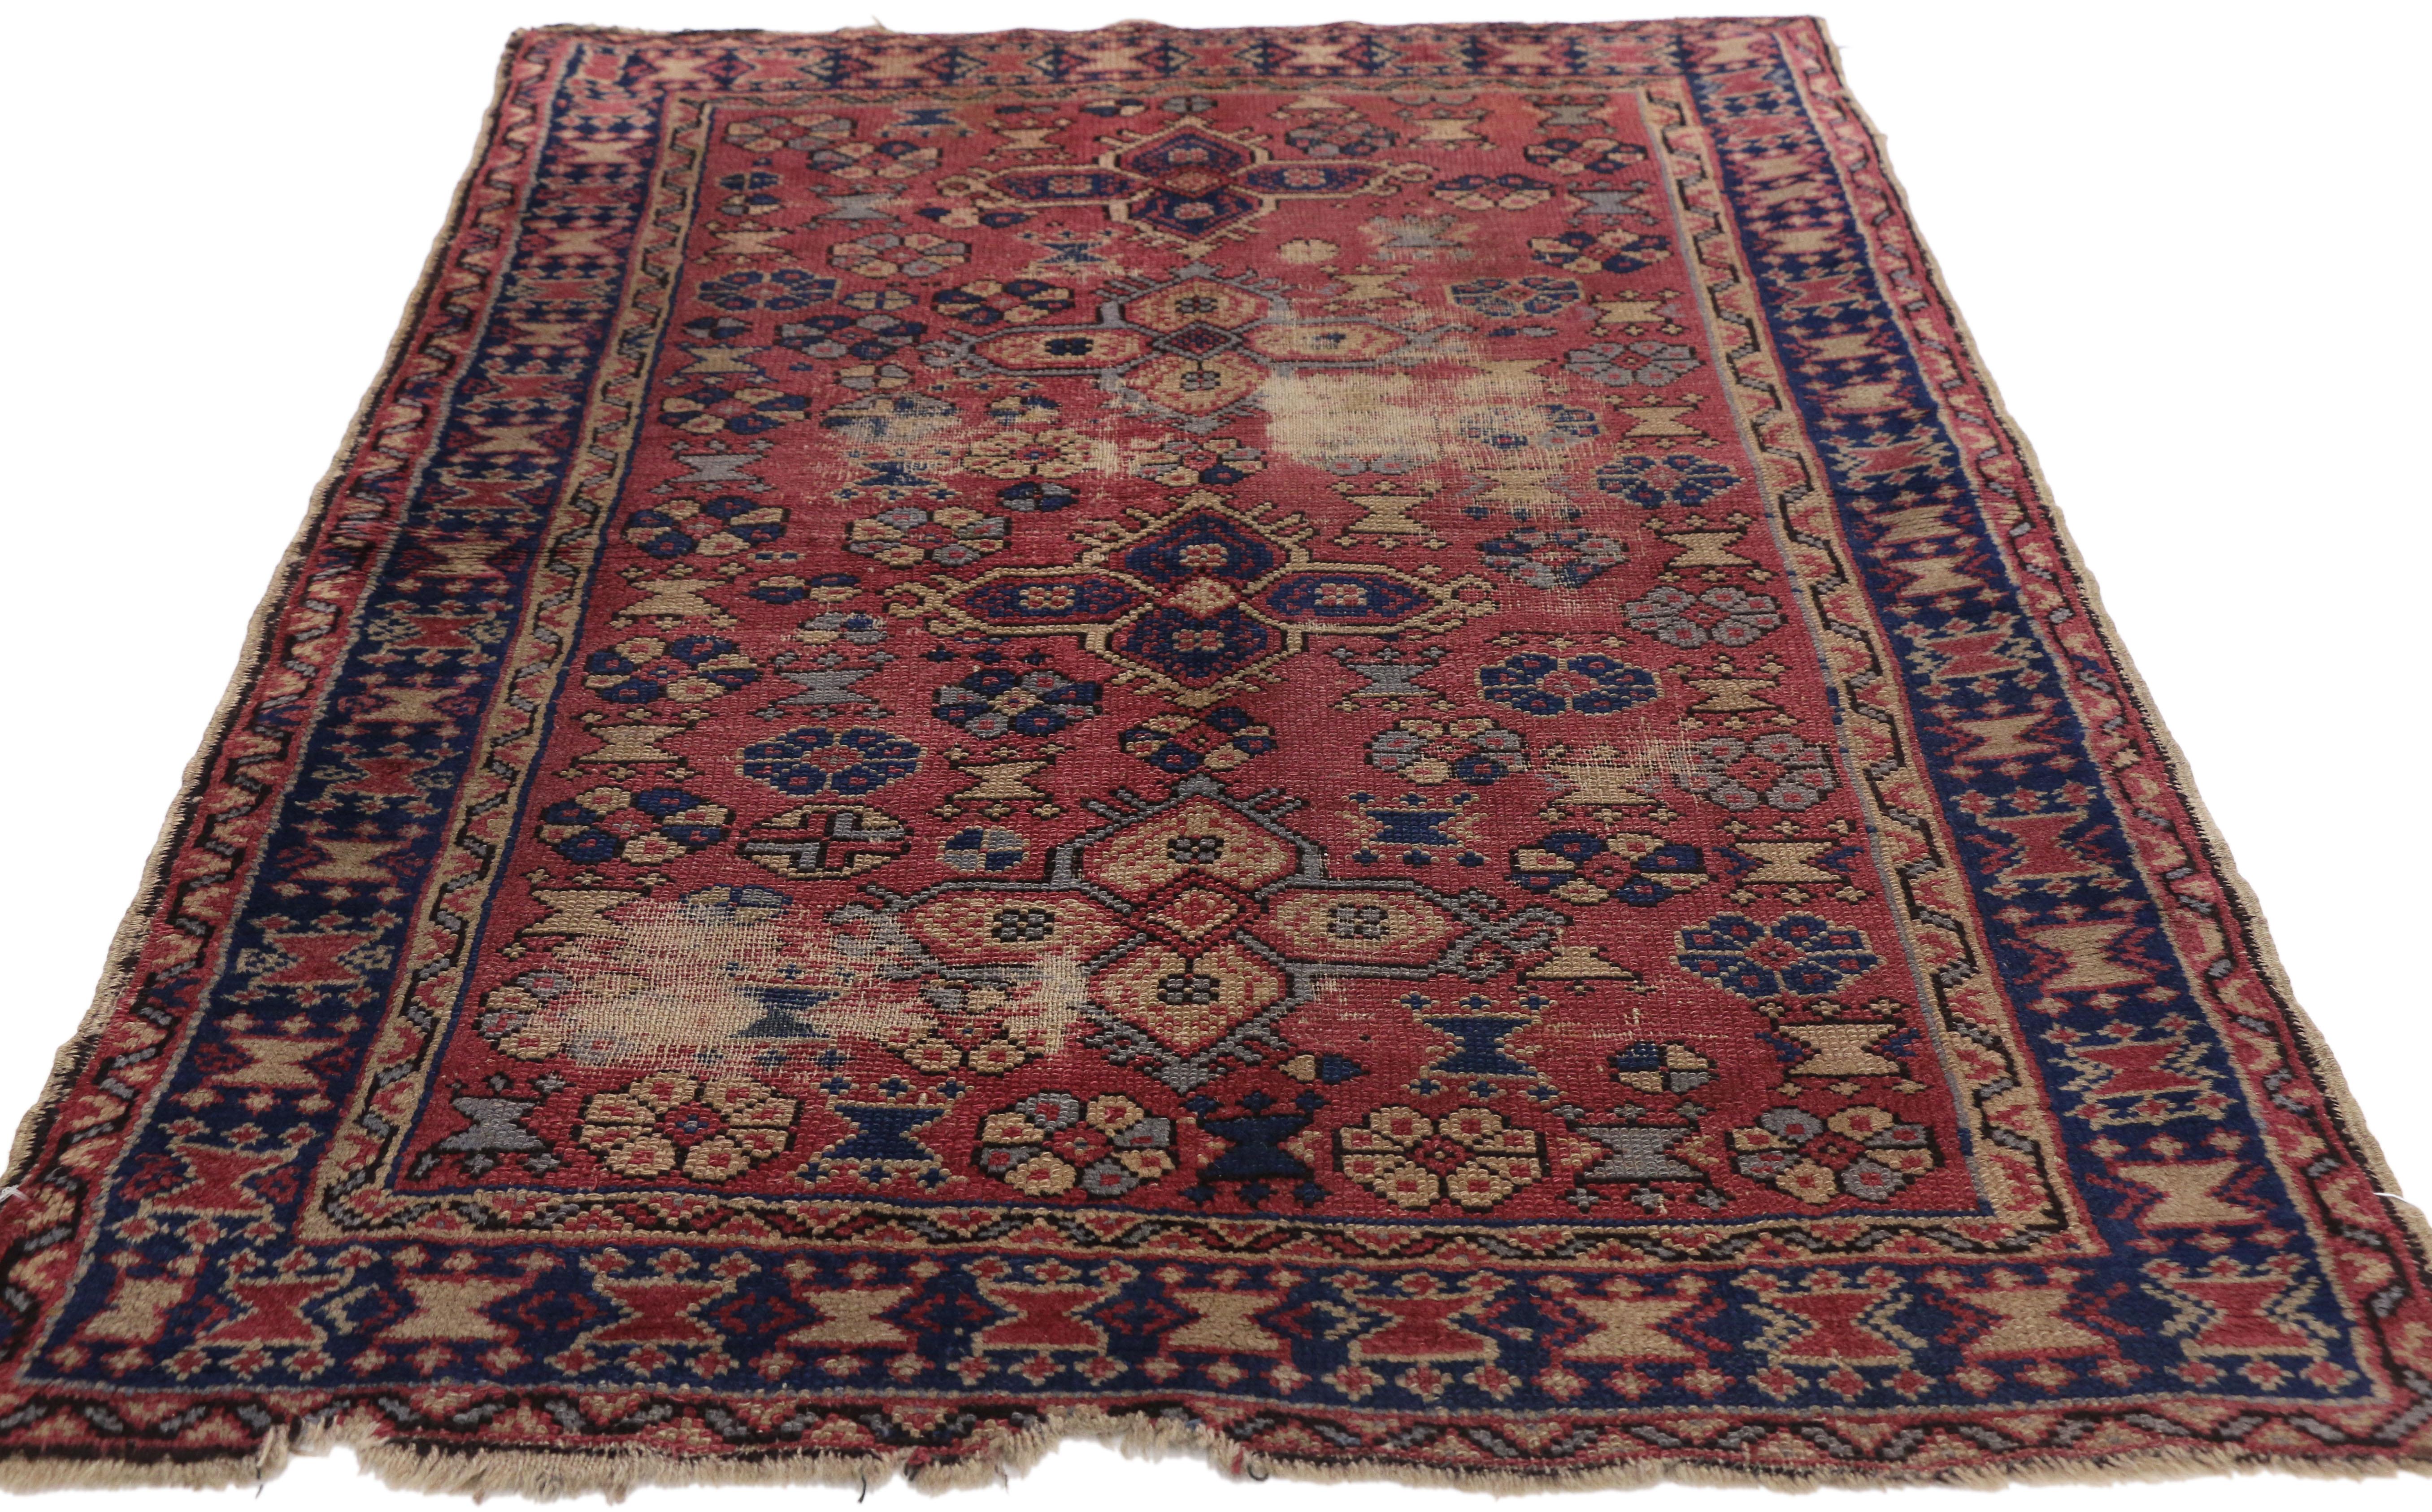 Persian Distressed Antique Turkish Sparta Rug with Industrial Rustic Artisan Style